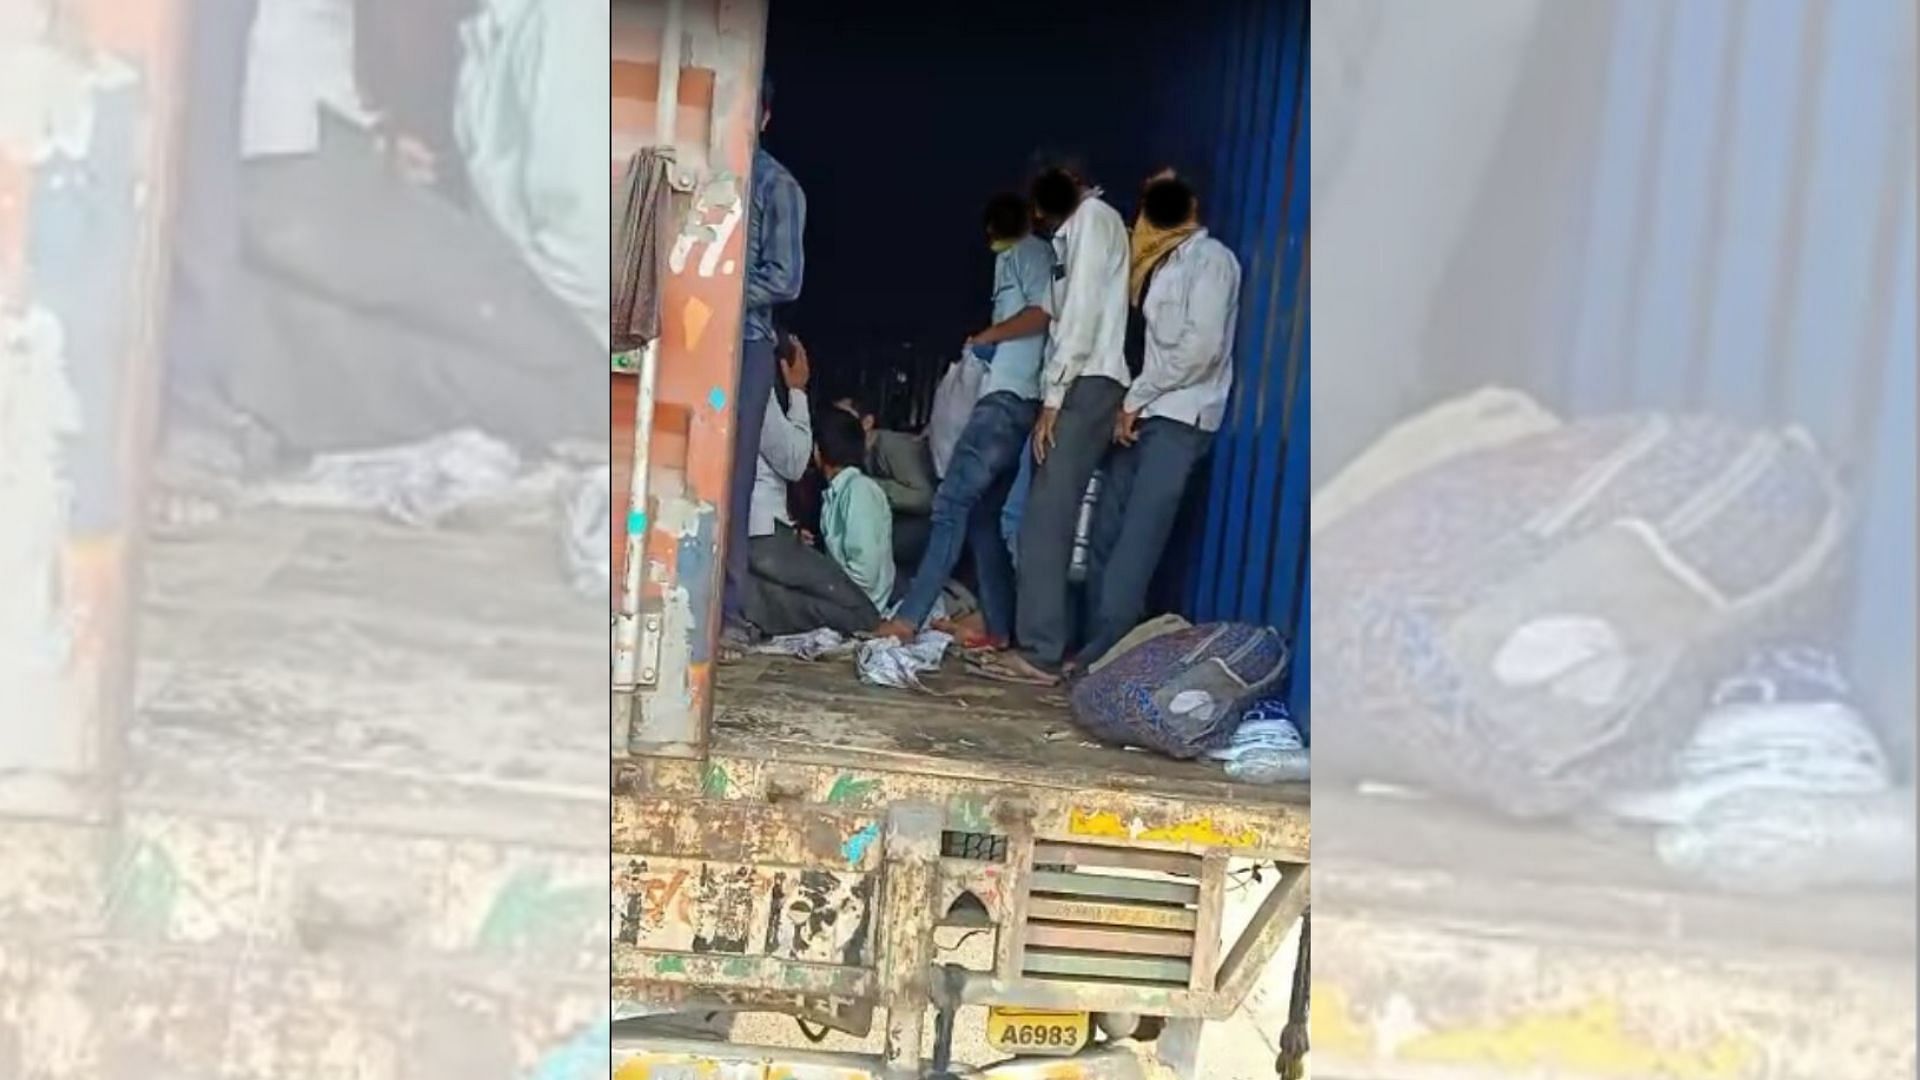 Maharashtra Police on Thursday, 26 March, found over 300 migrant workers crammed inside two container trucks which were ostensibly carrying essential commodities from Telangana to Rajasthan.&nbsp;